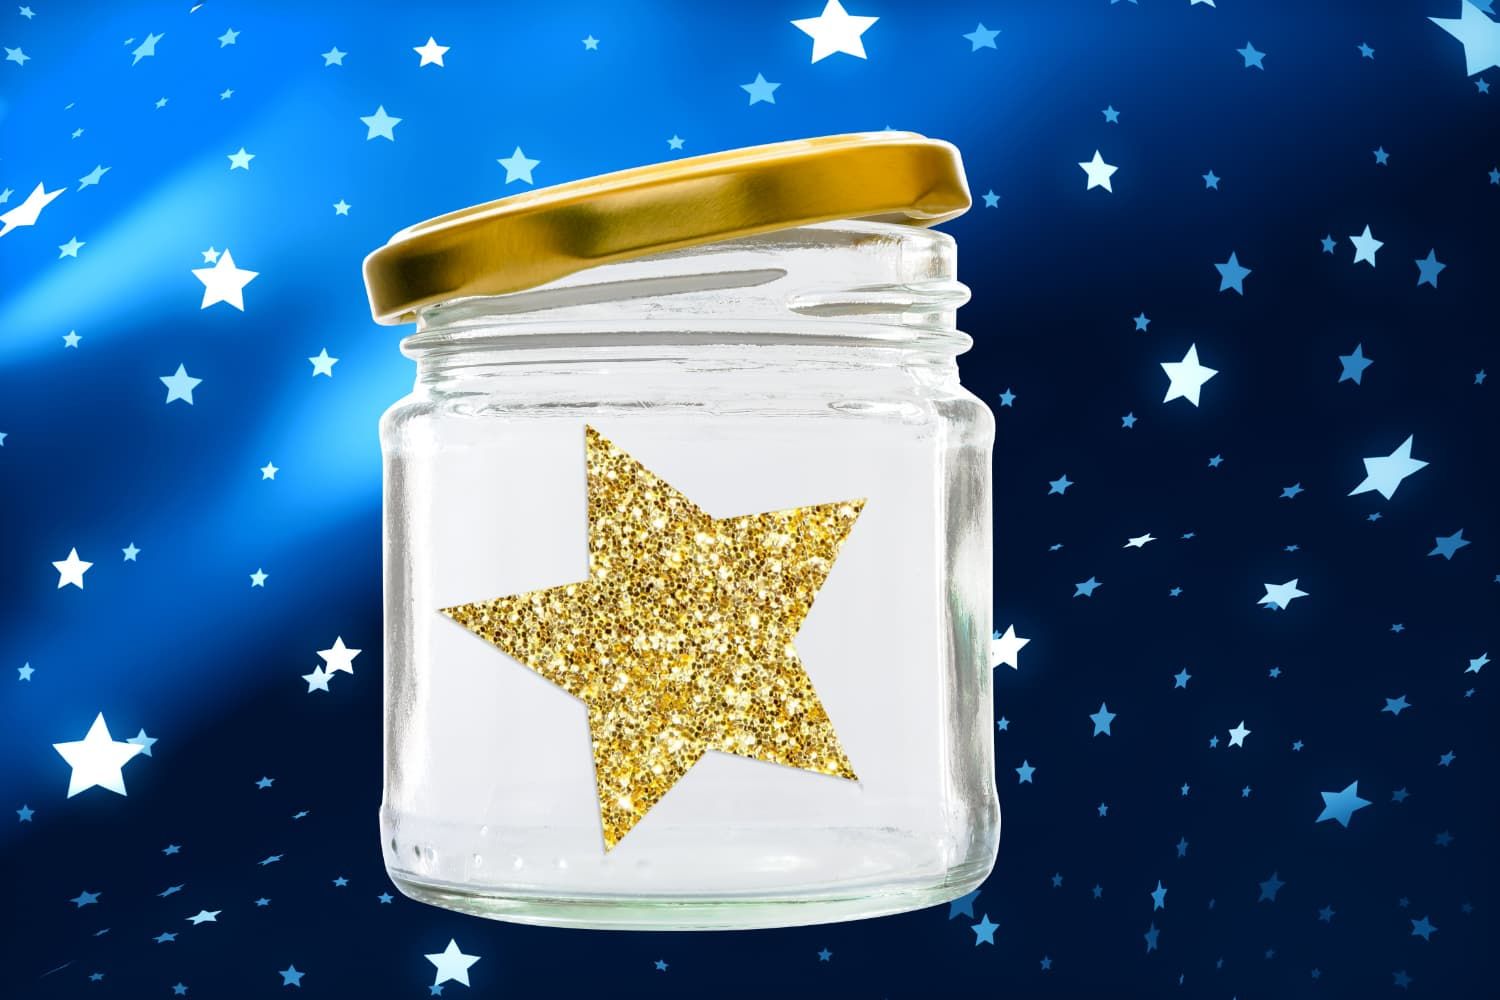 Object%20lesson%20-%20Stars%20in%20a%20jar-6132cbc5 Father / Father's Day